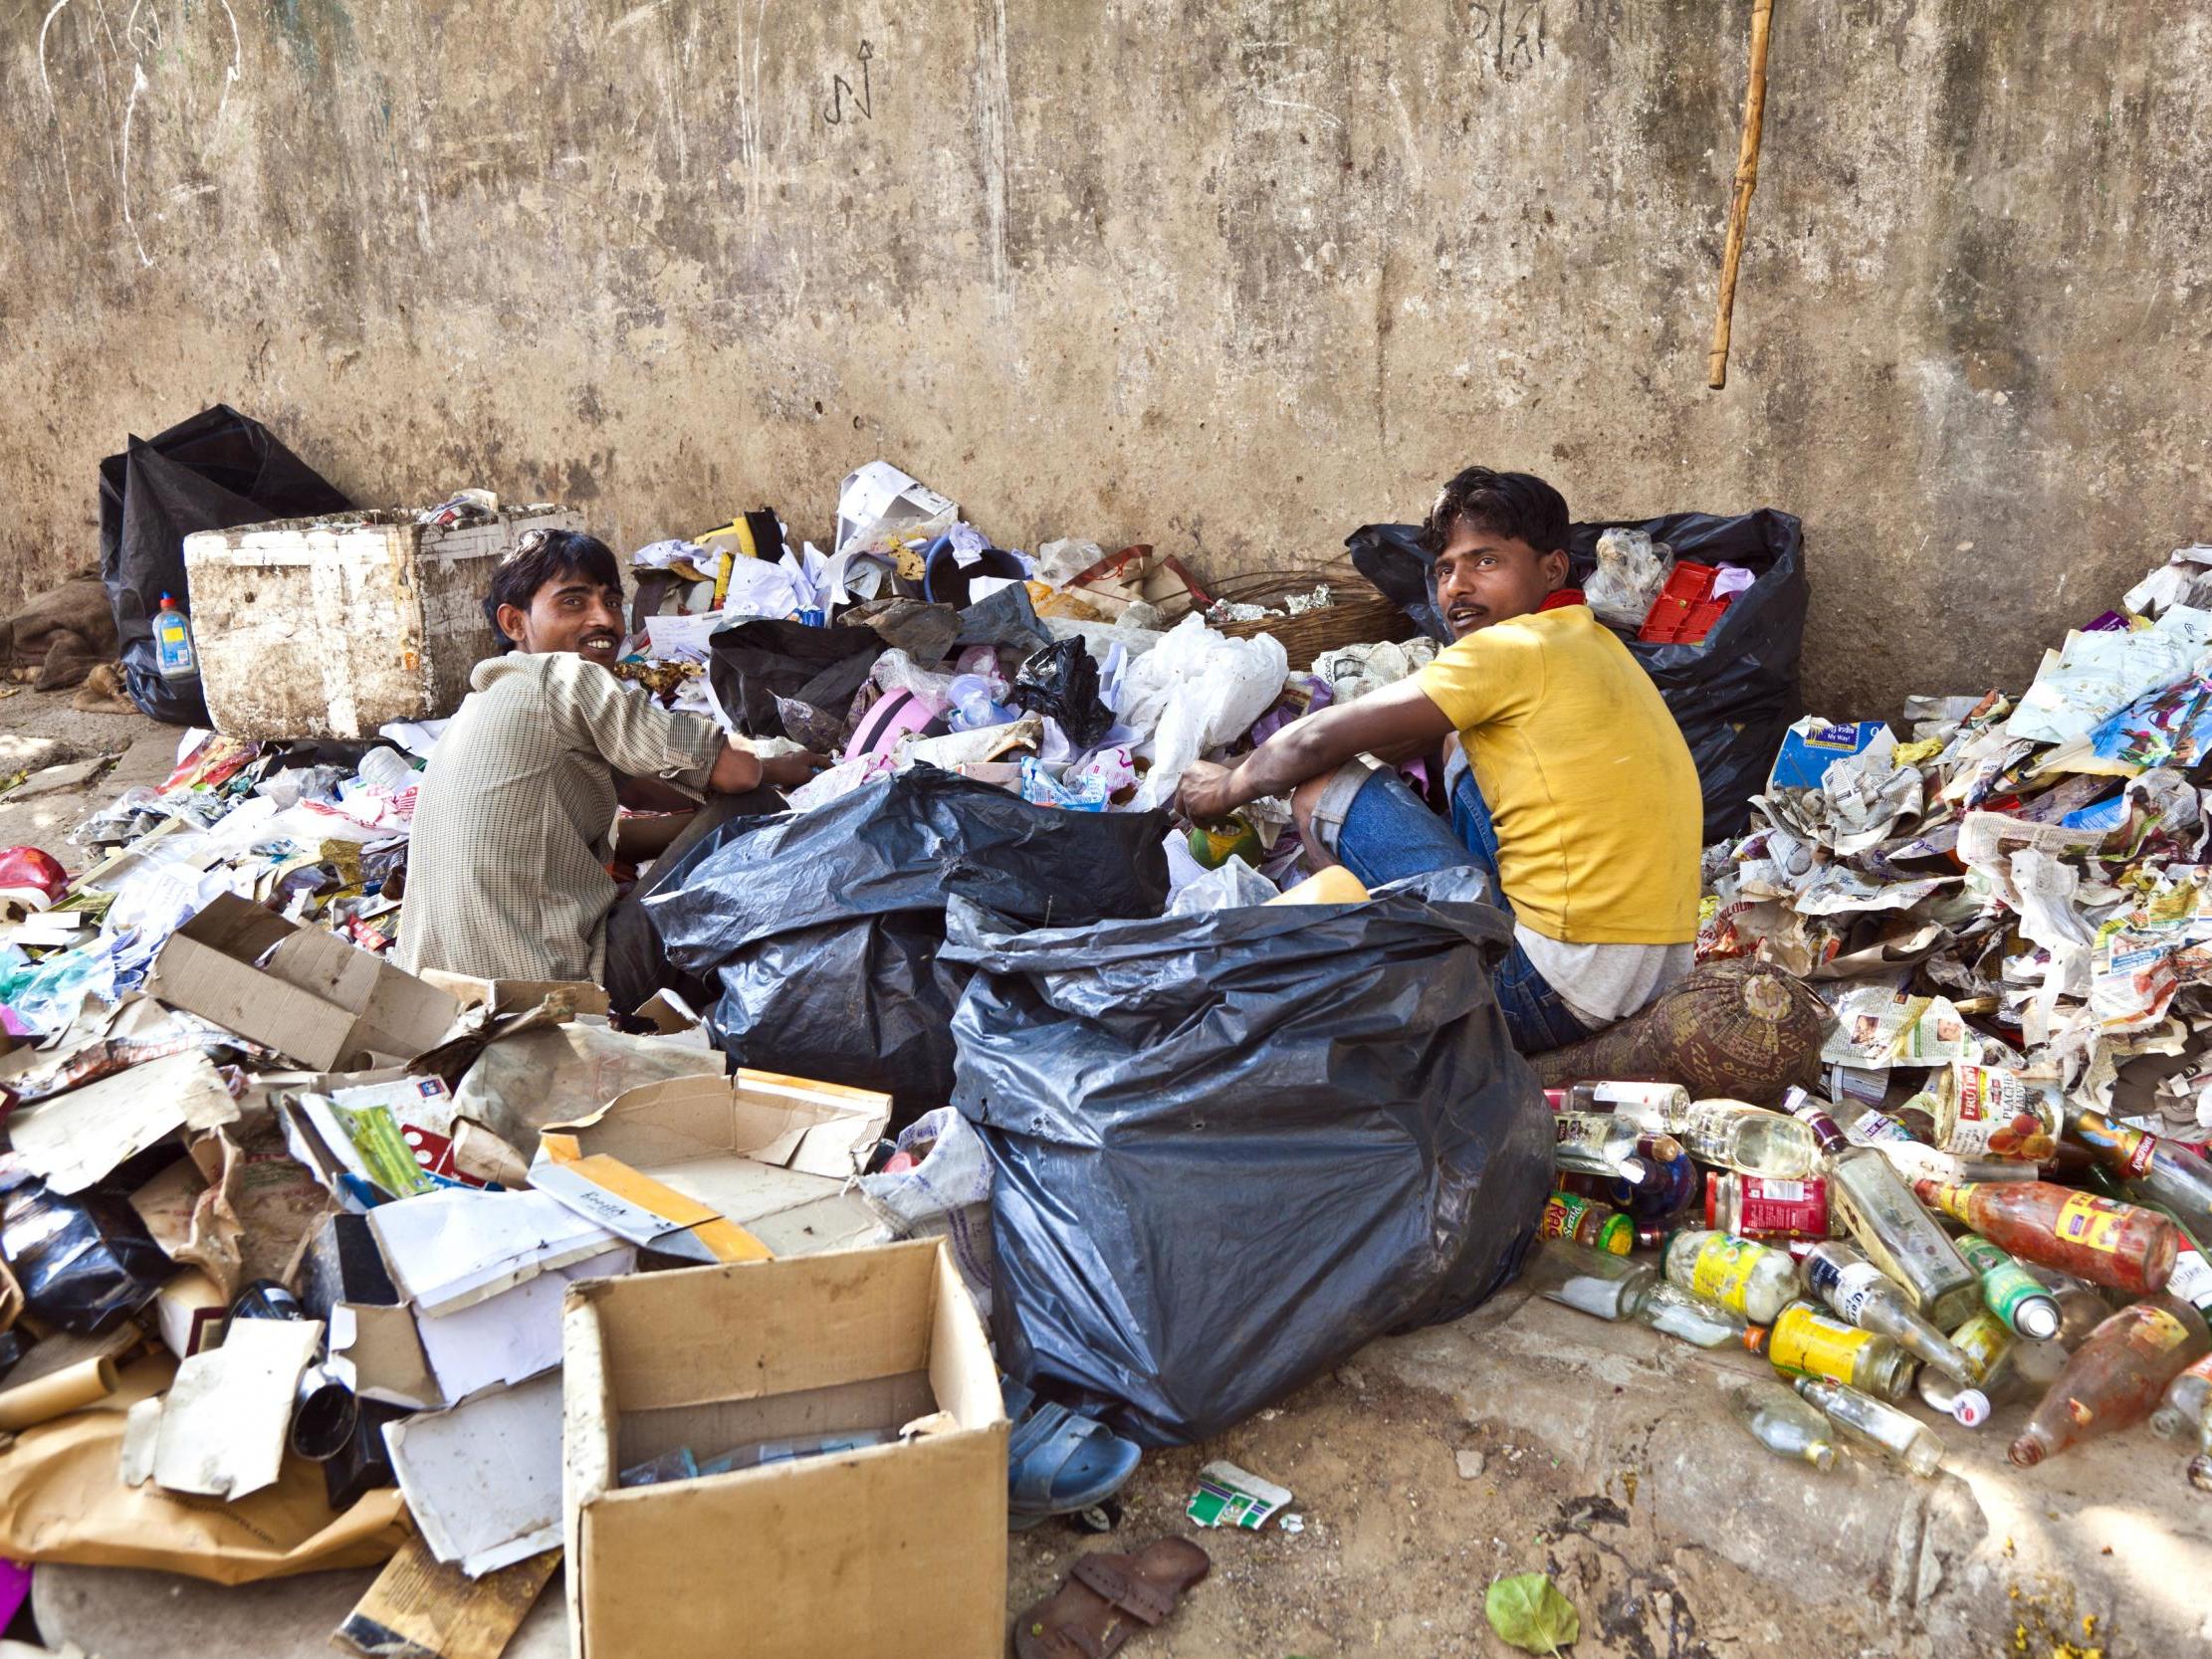 Workers checking rubbish for plastic and paper for waste separation in Delhi, India